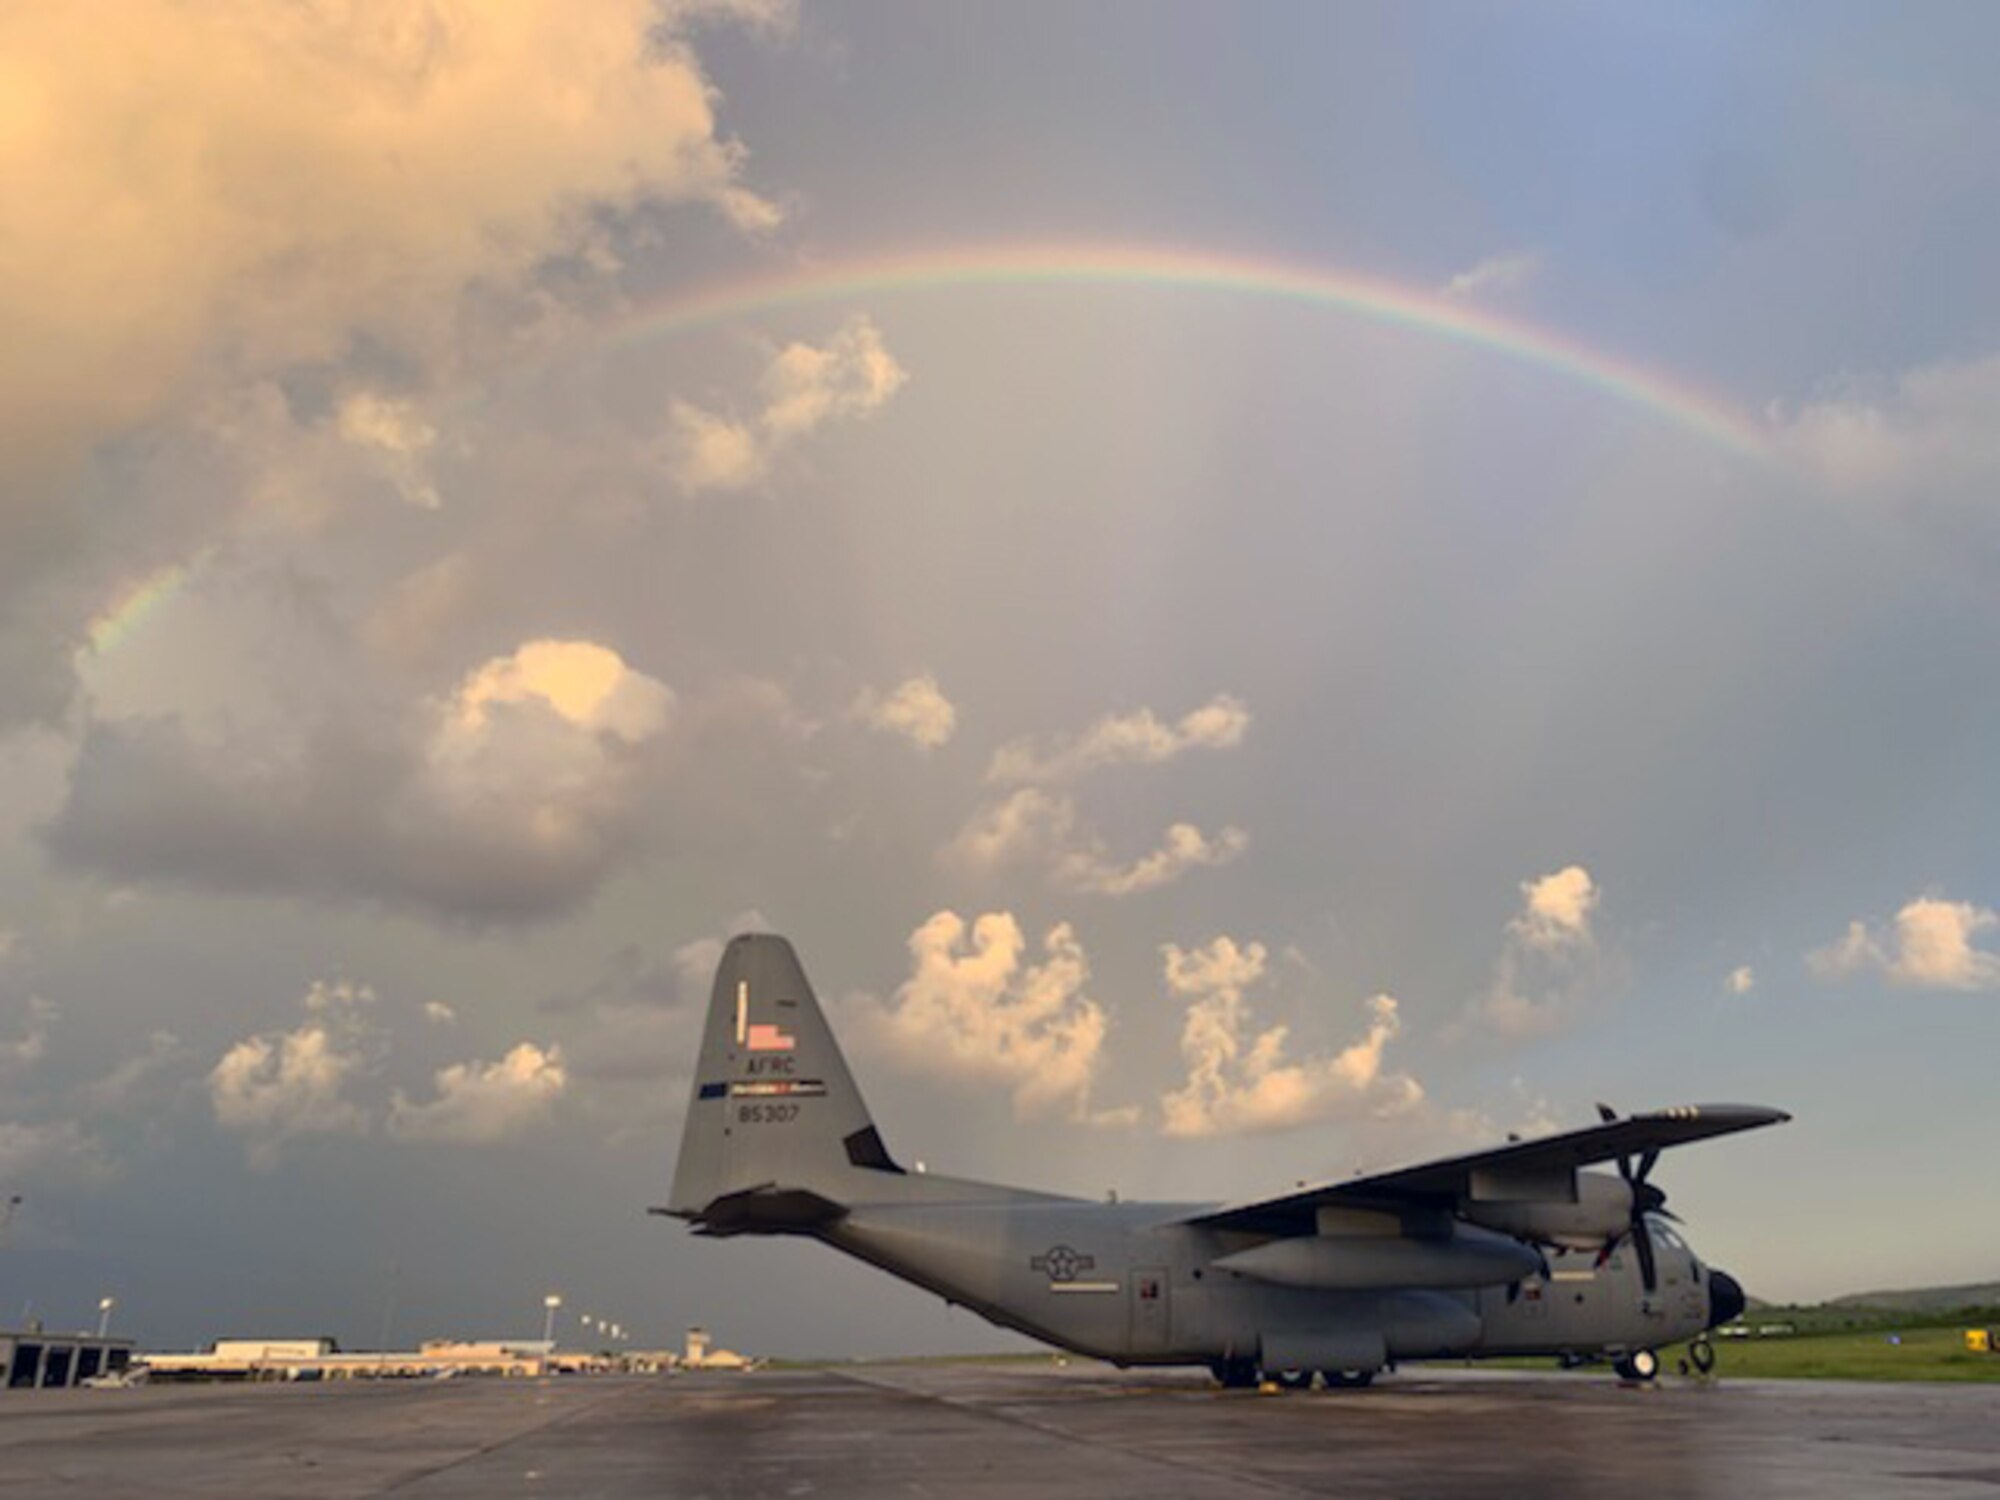 After the last flight into Hurricane Sam, the 53rd Weather Reconnaissance Squadron returned to their forward operation location in the St. Croix, U.S. Virgin Islands, Oct 2, 2021. This location is used to operate 24 hours a day for storms that are located in the Atlantic Ocean that are not within reach of Keesler Air Force Base, Mississippi. (U.S. Air Force photo by Master Sgt. Tauston Jackson)